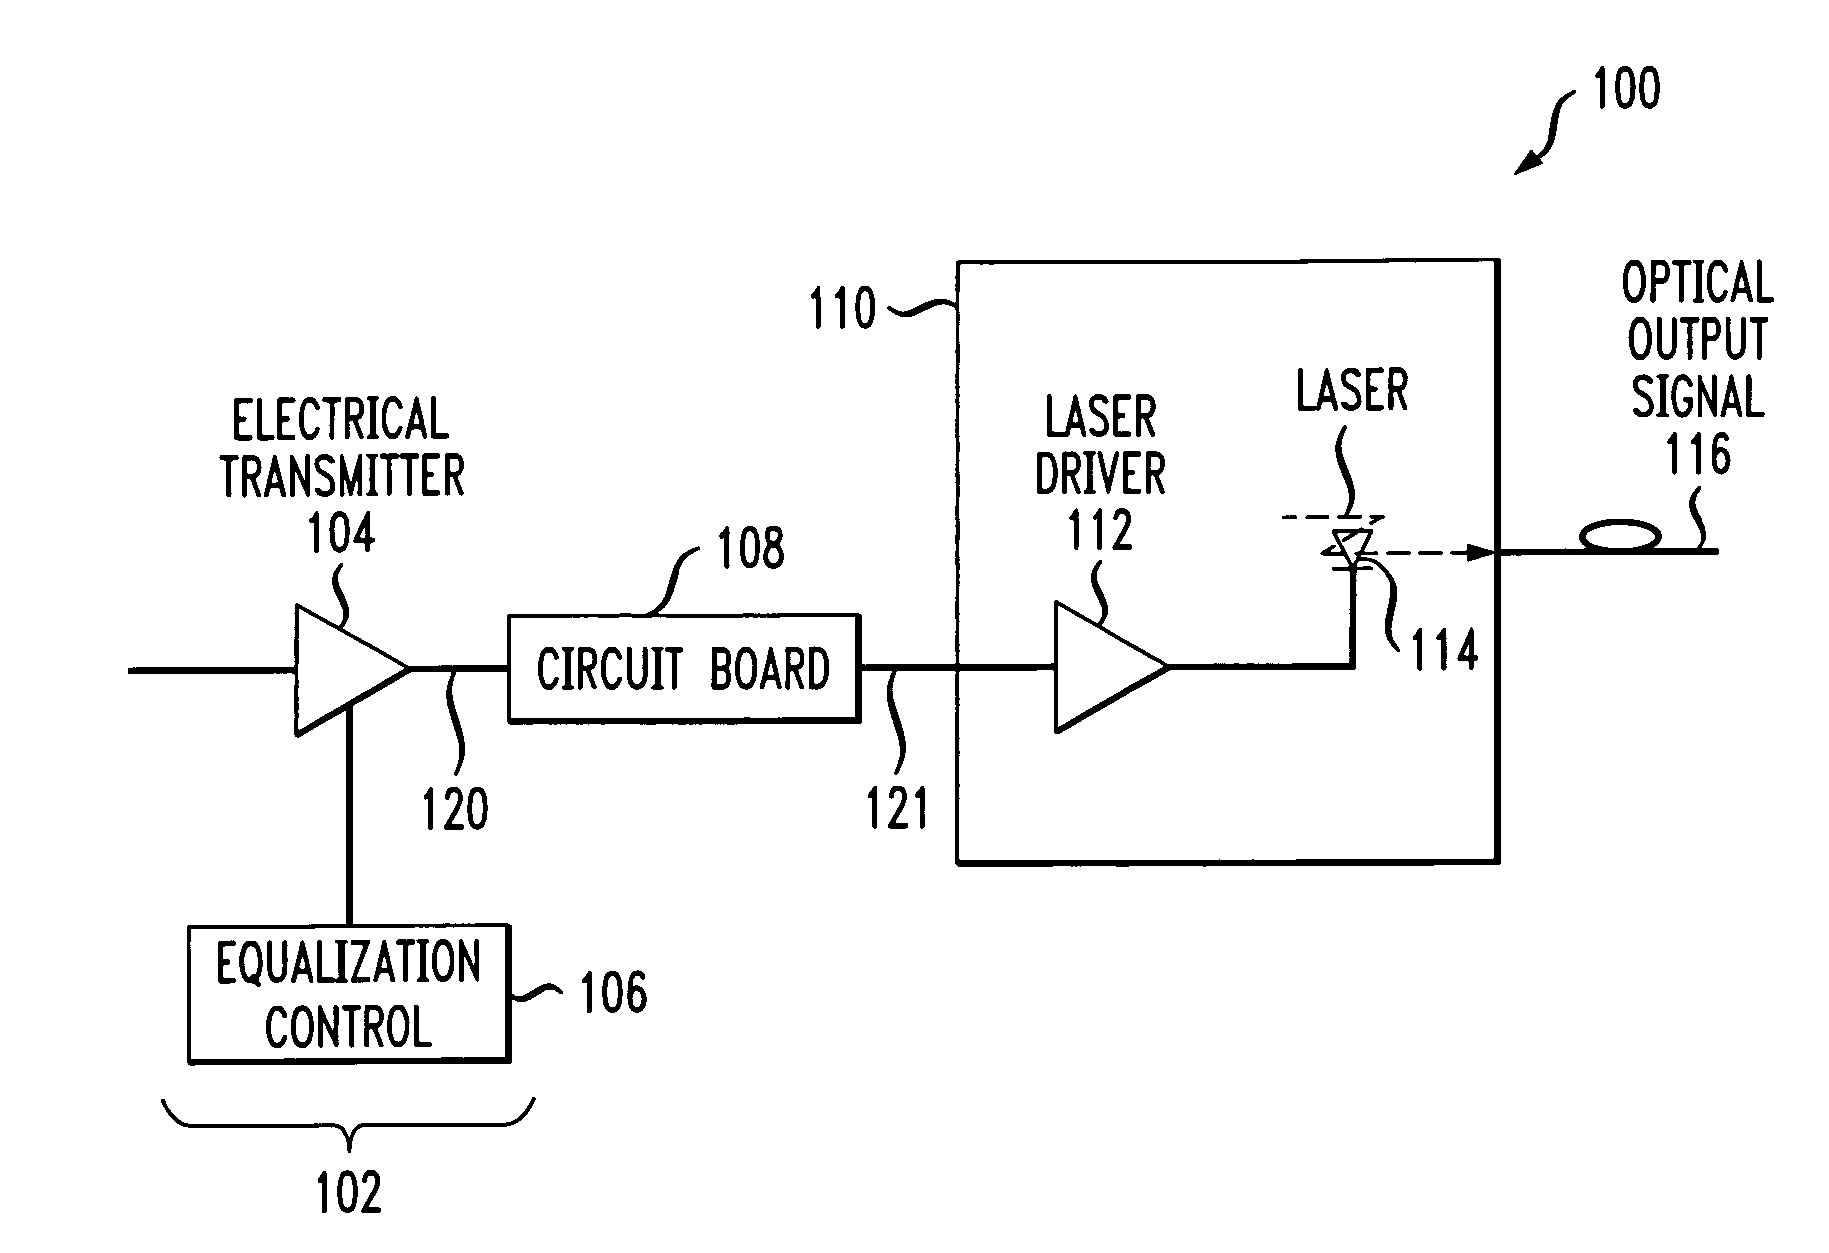 Optical signal jitter reduction via electrical equalization in optical transmission systems